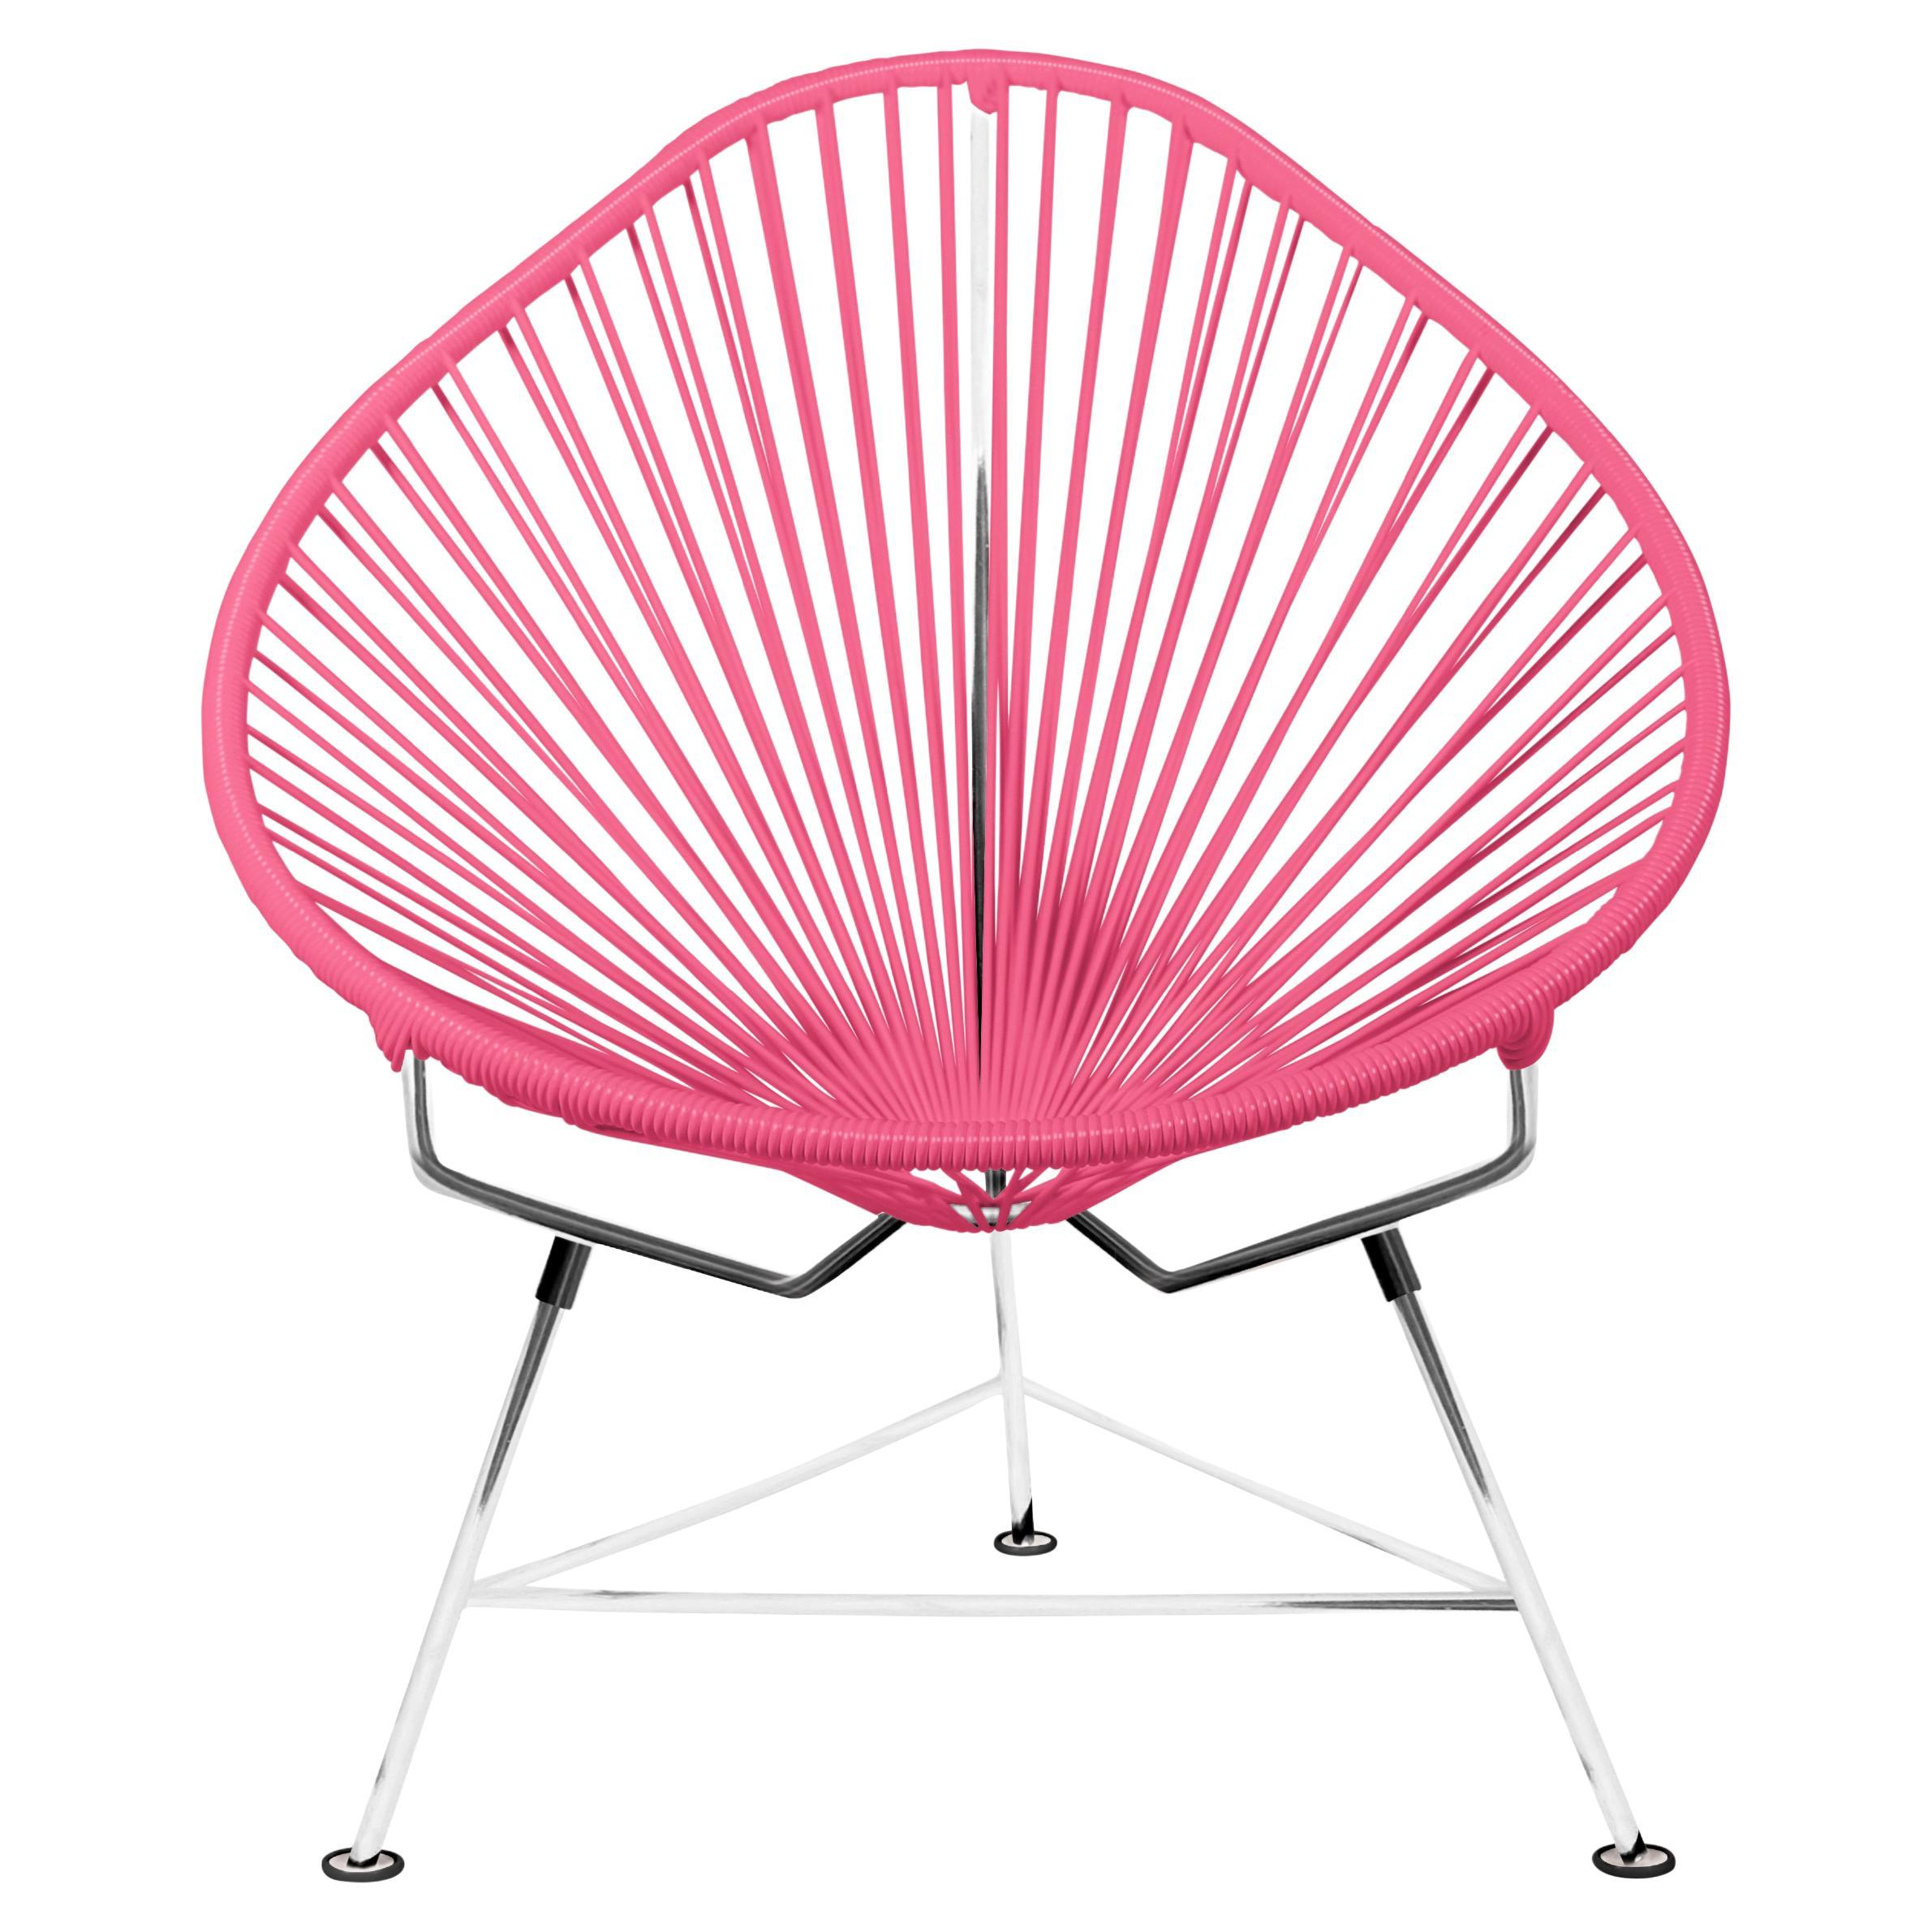 Innit Designs Acapulco Chair Pink Weave on Chrome Frame